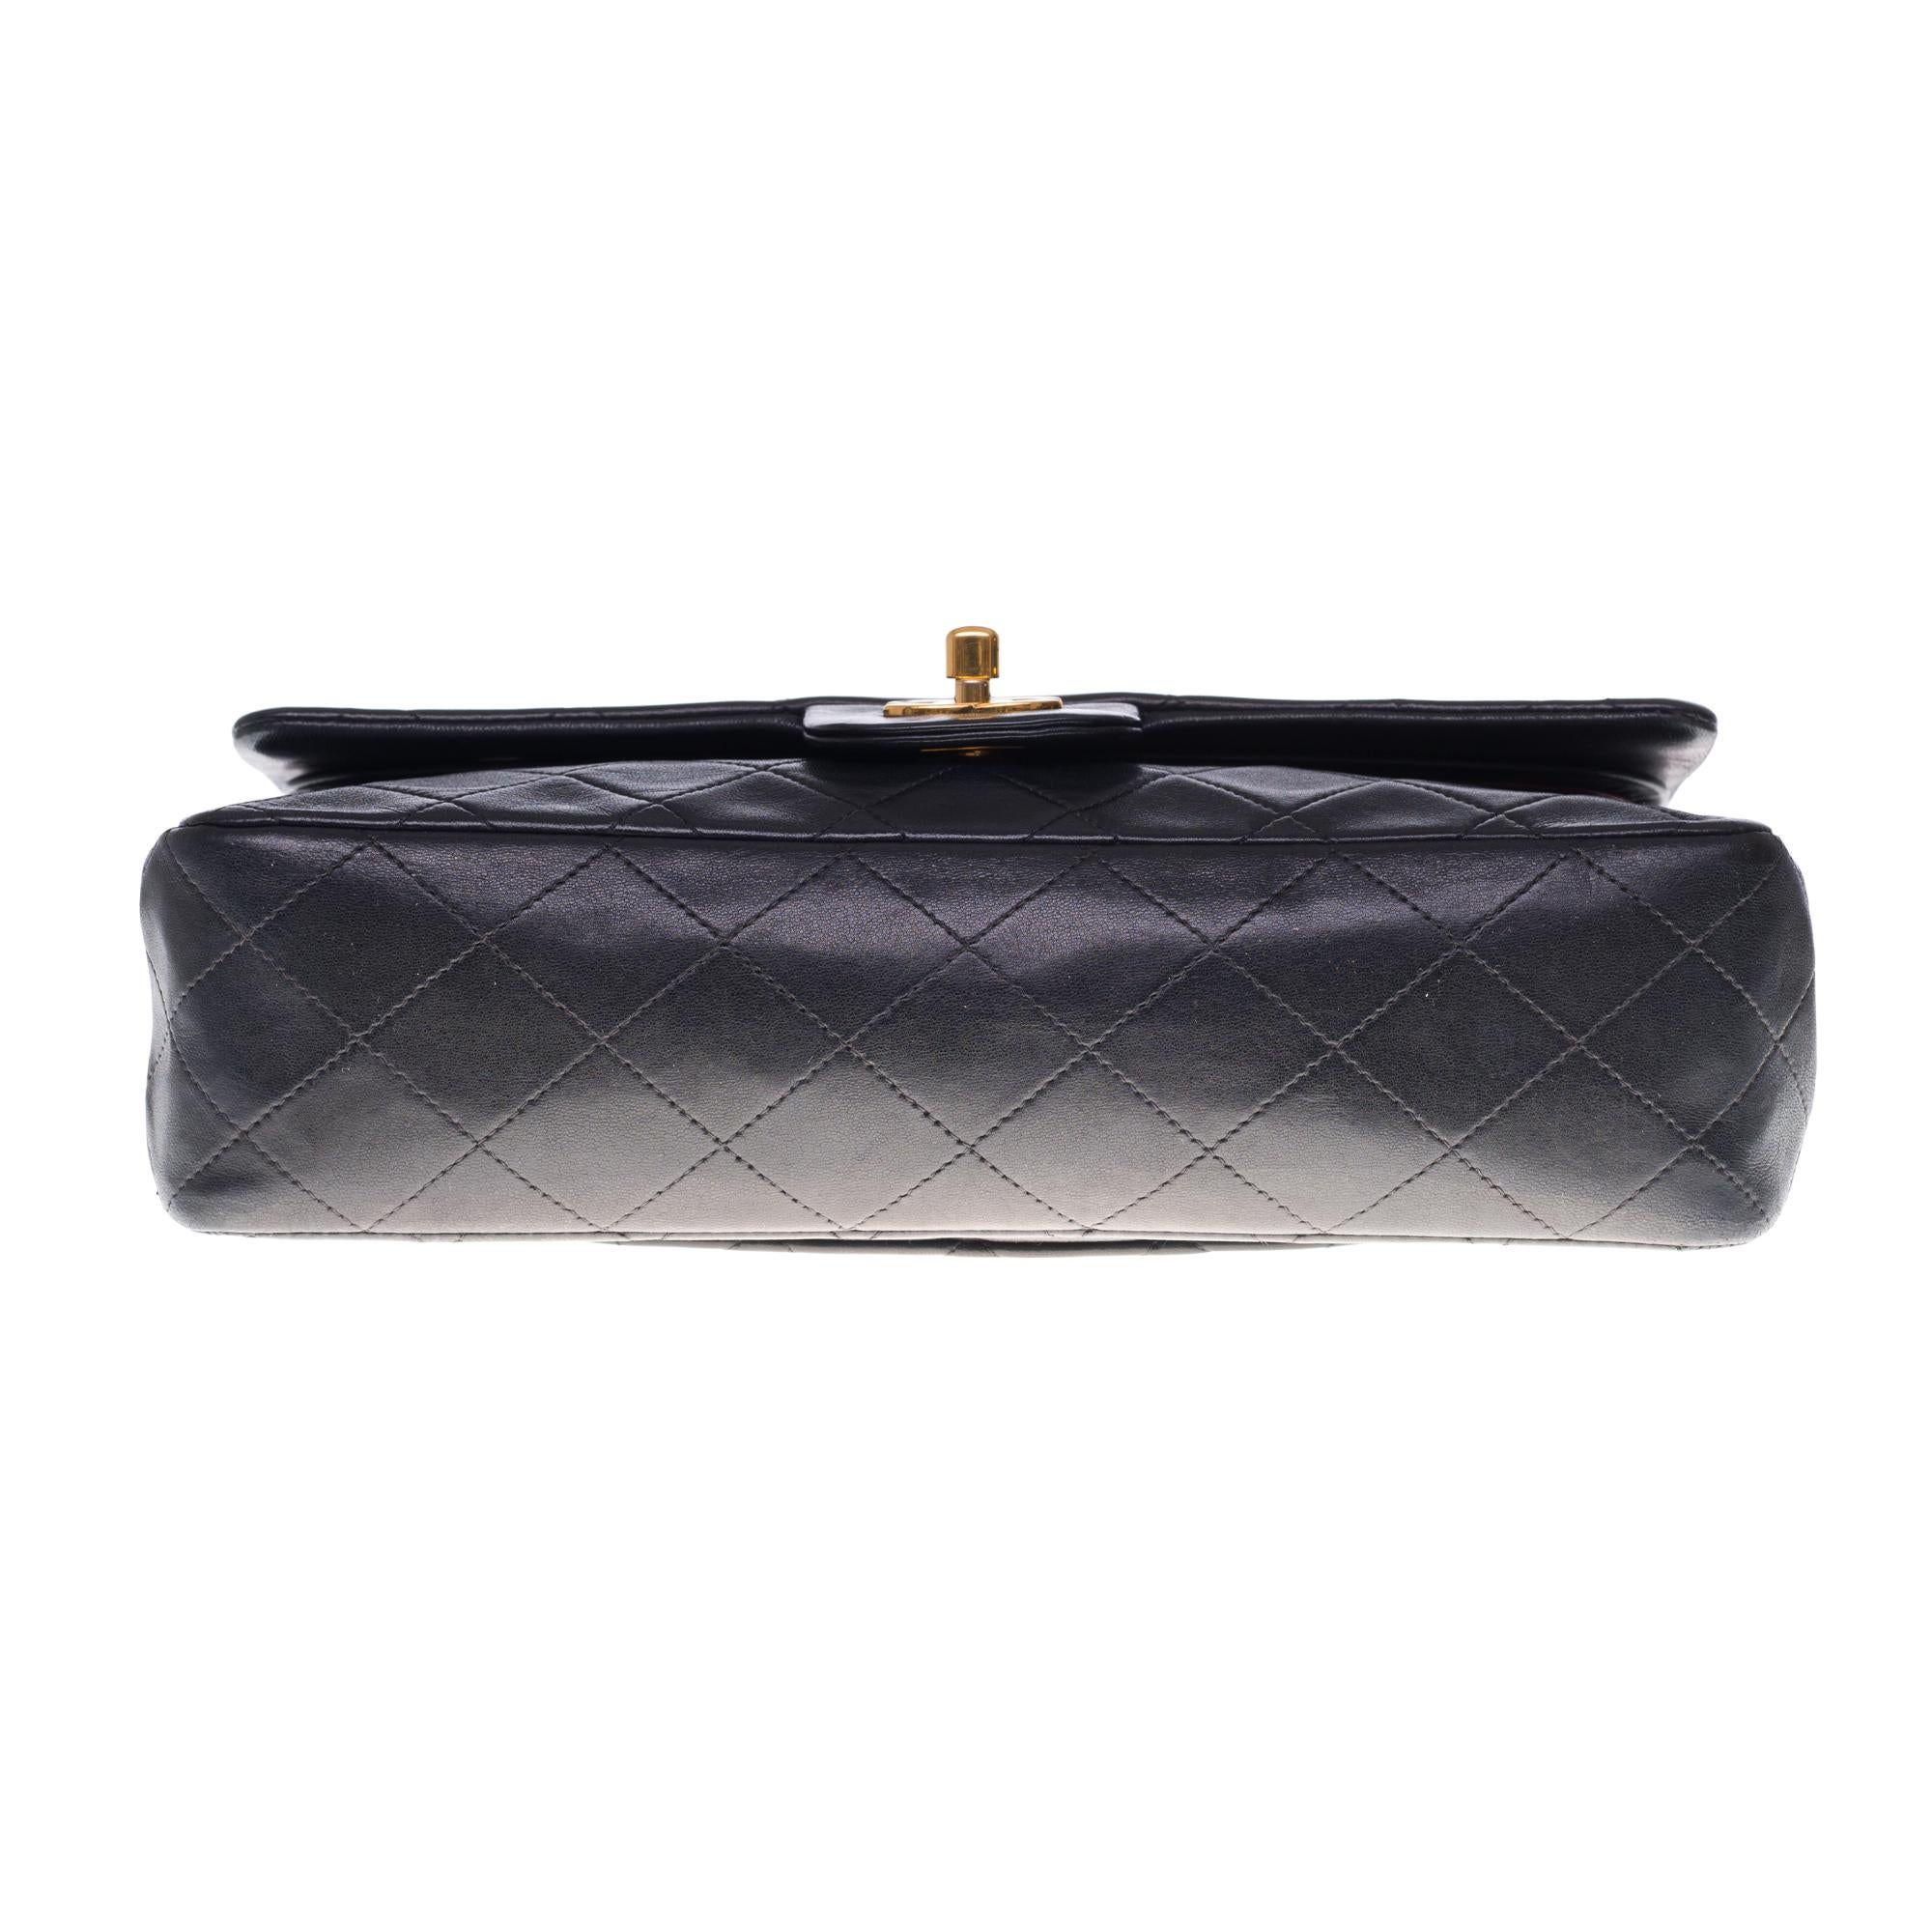 Chanel Timeless Medium Shoulder bag in black quilted leather and gold hardware 3